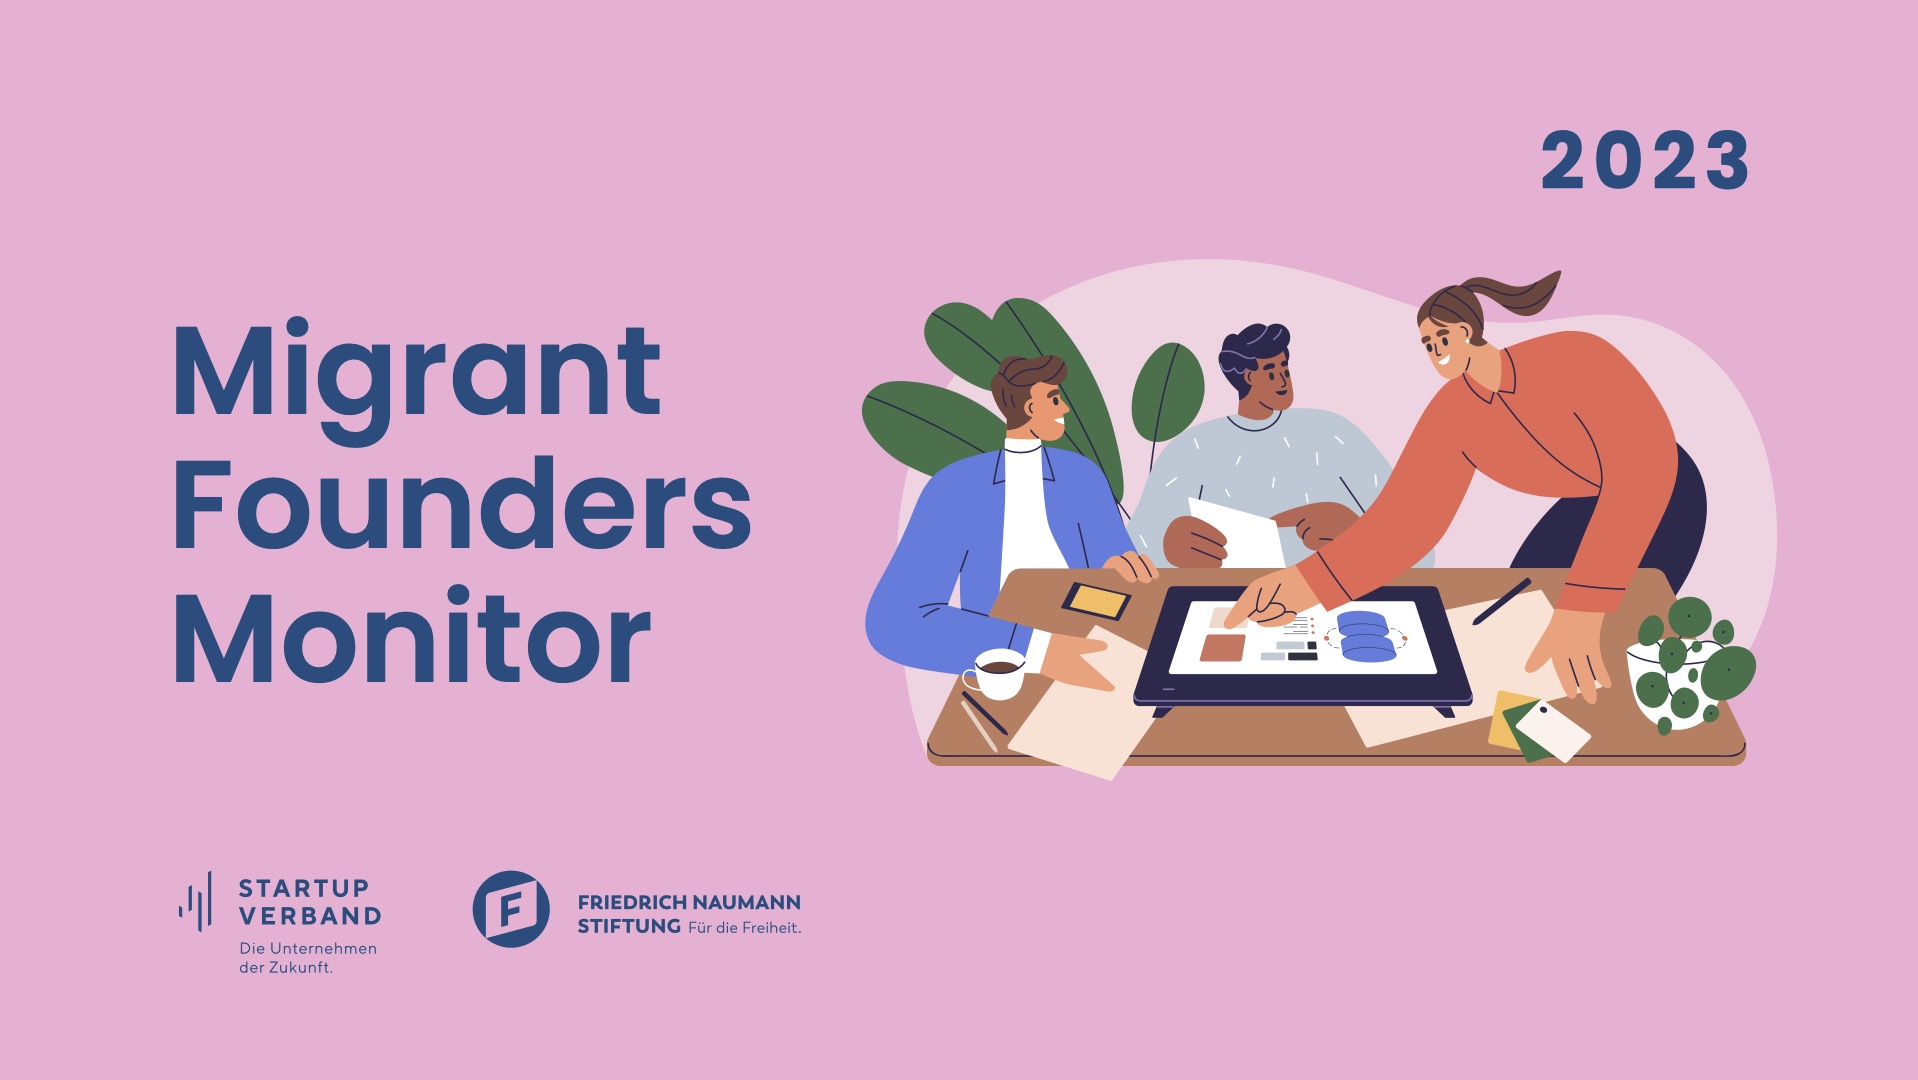 Migrant Founders Monitor 2023